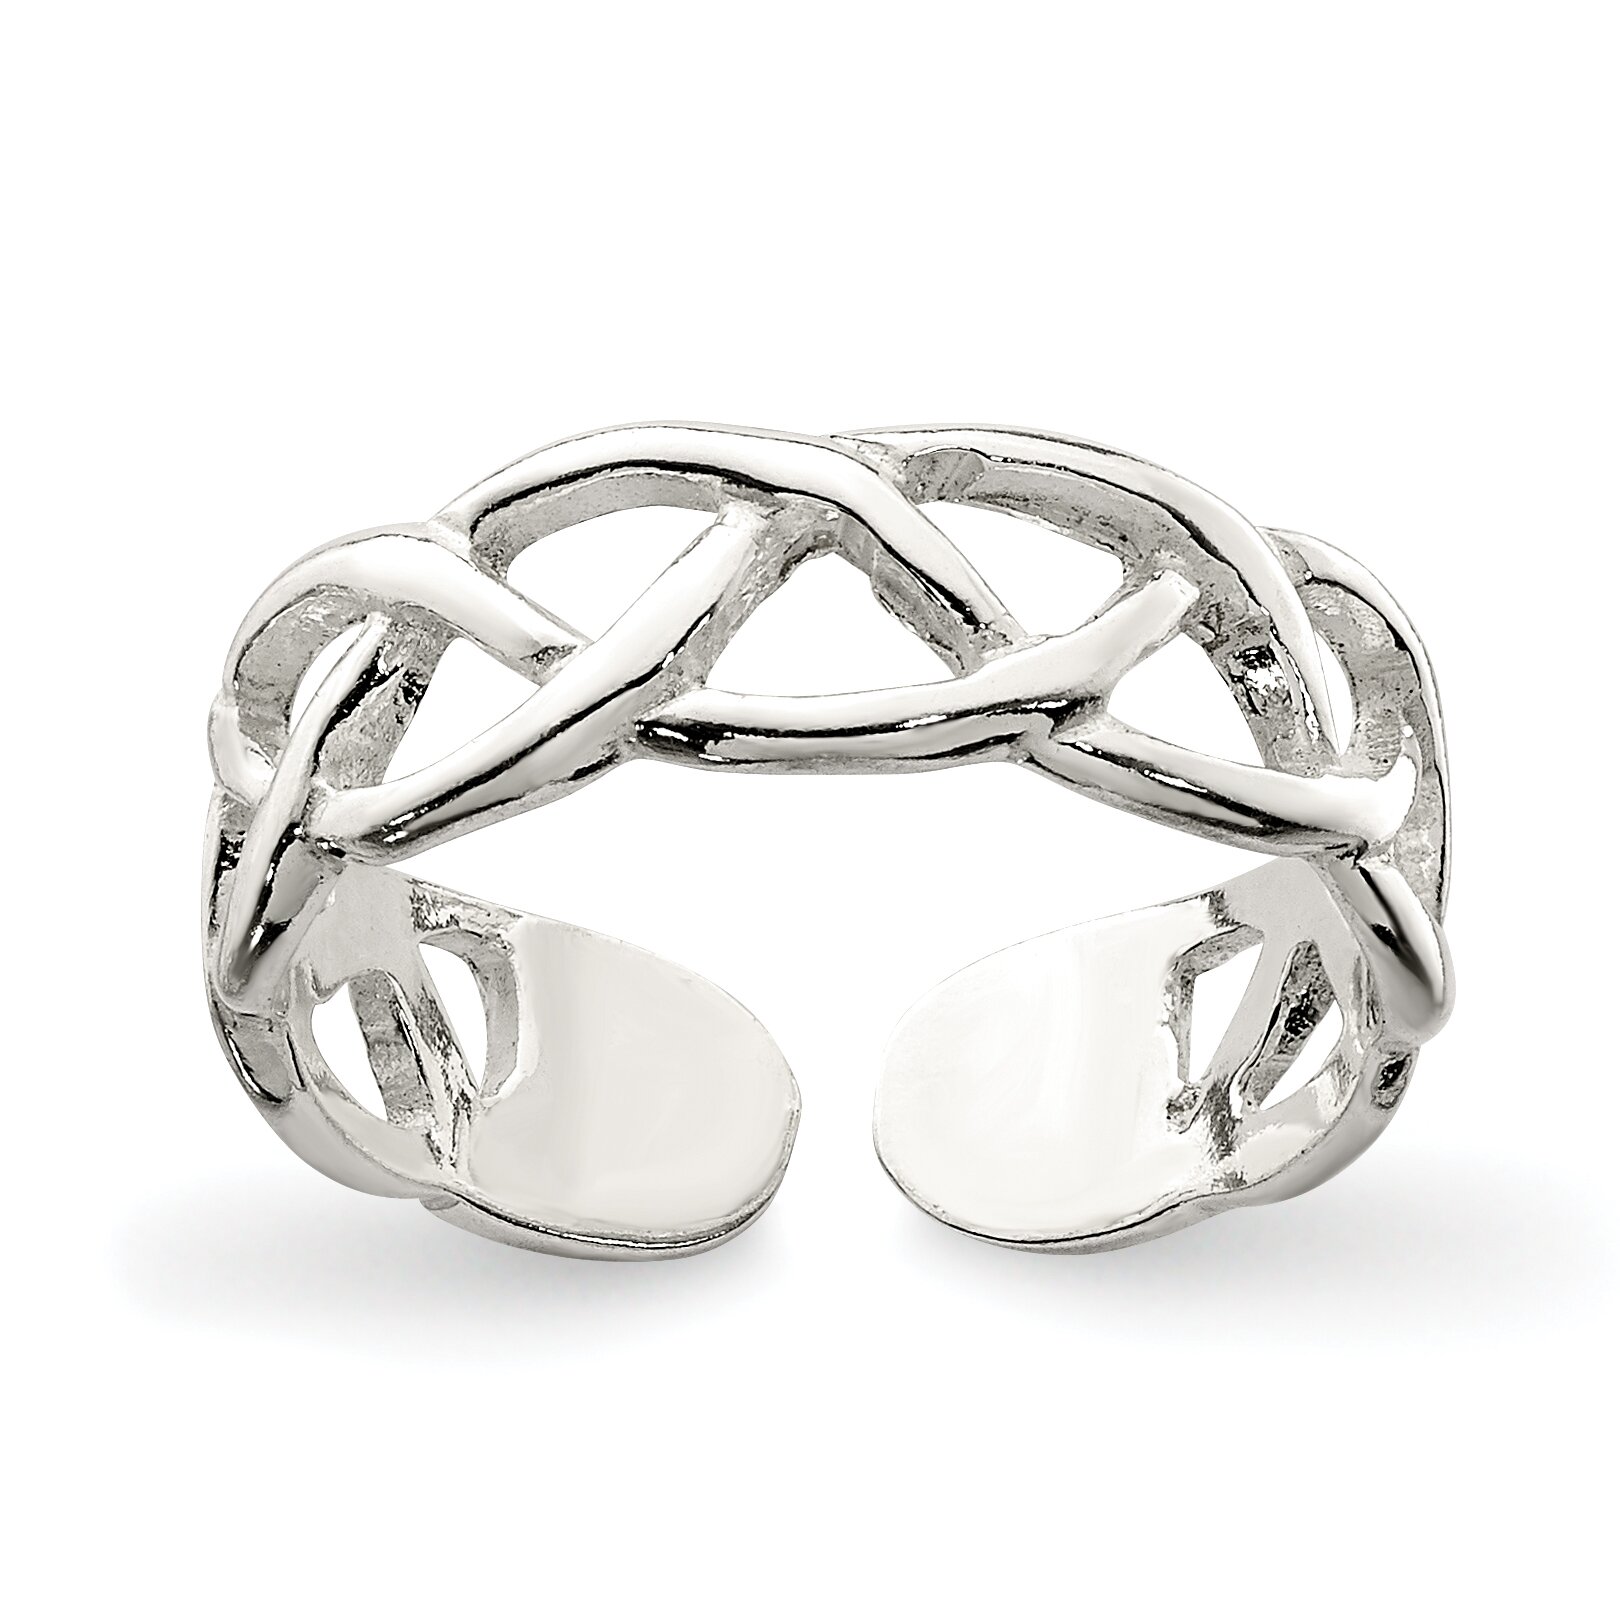 Findingking Sterling Silver Toe Ring